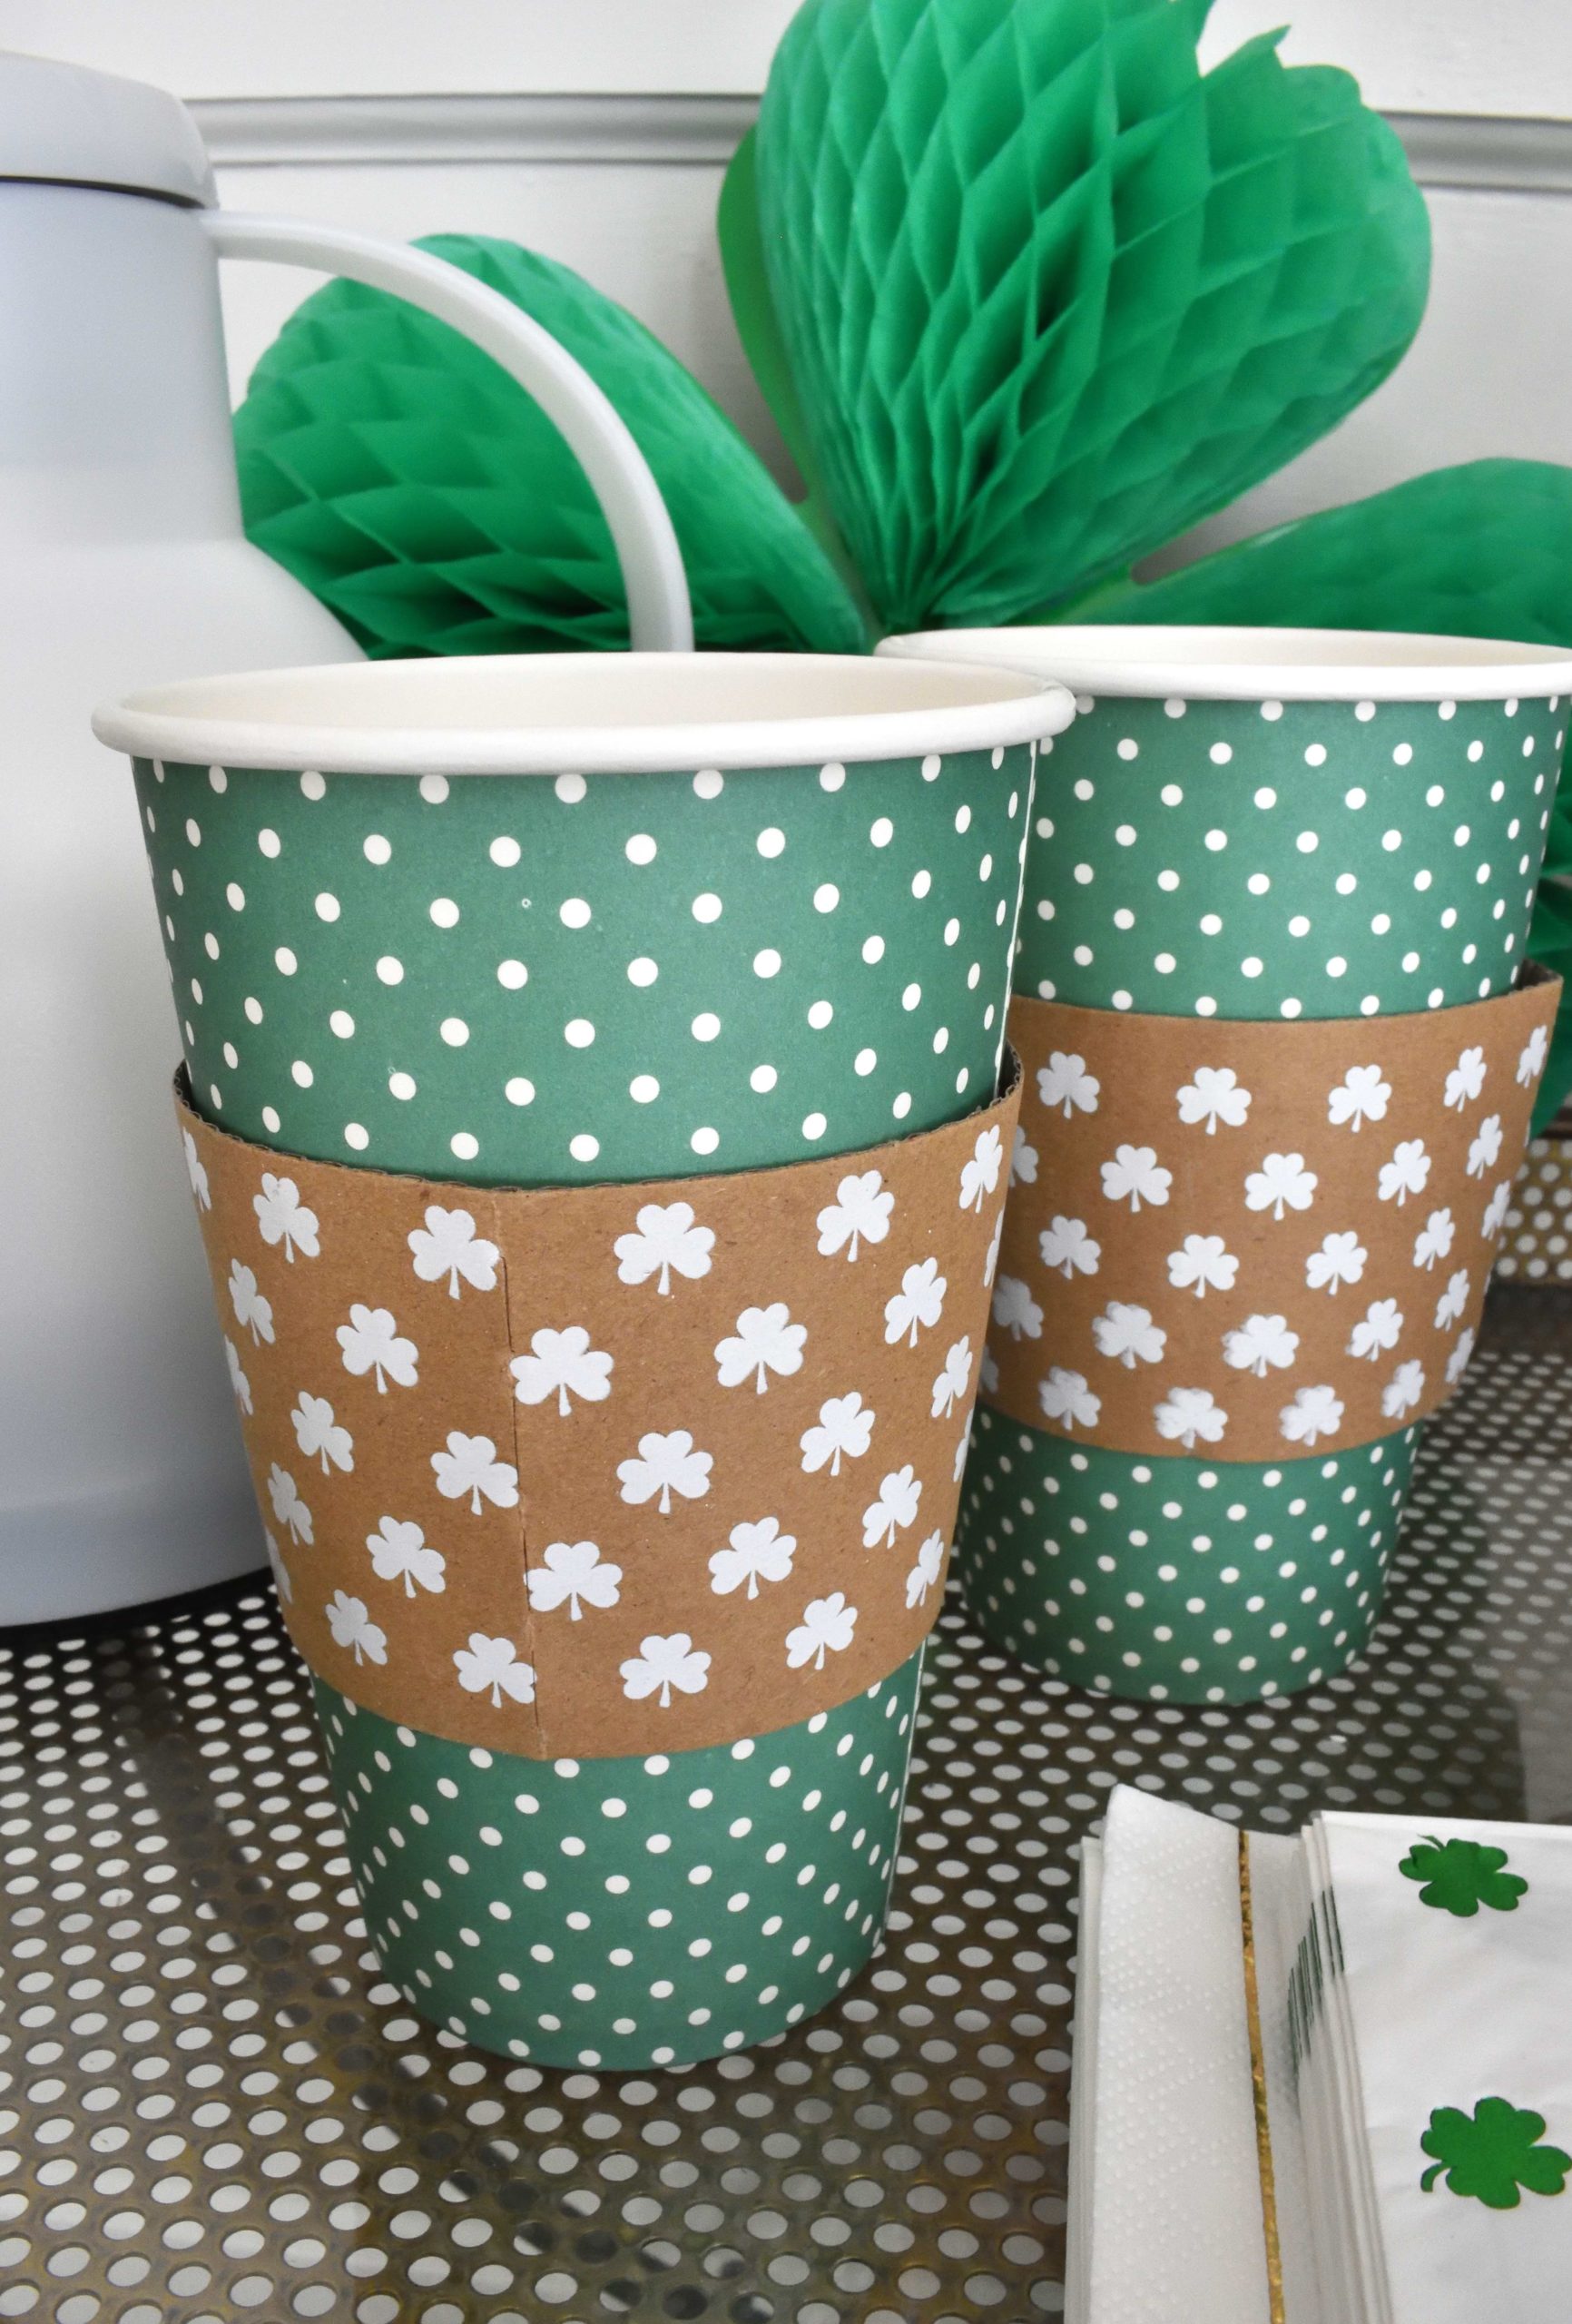 St. Paddy's Day party supplies